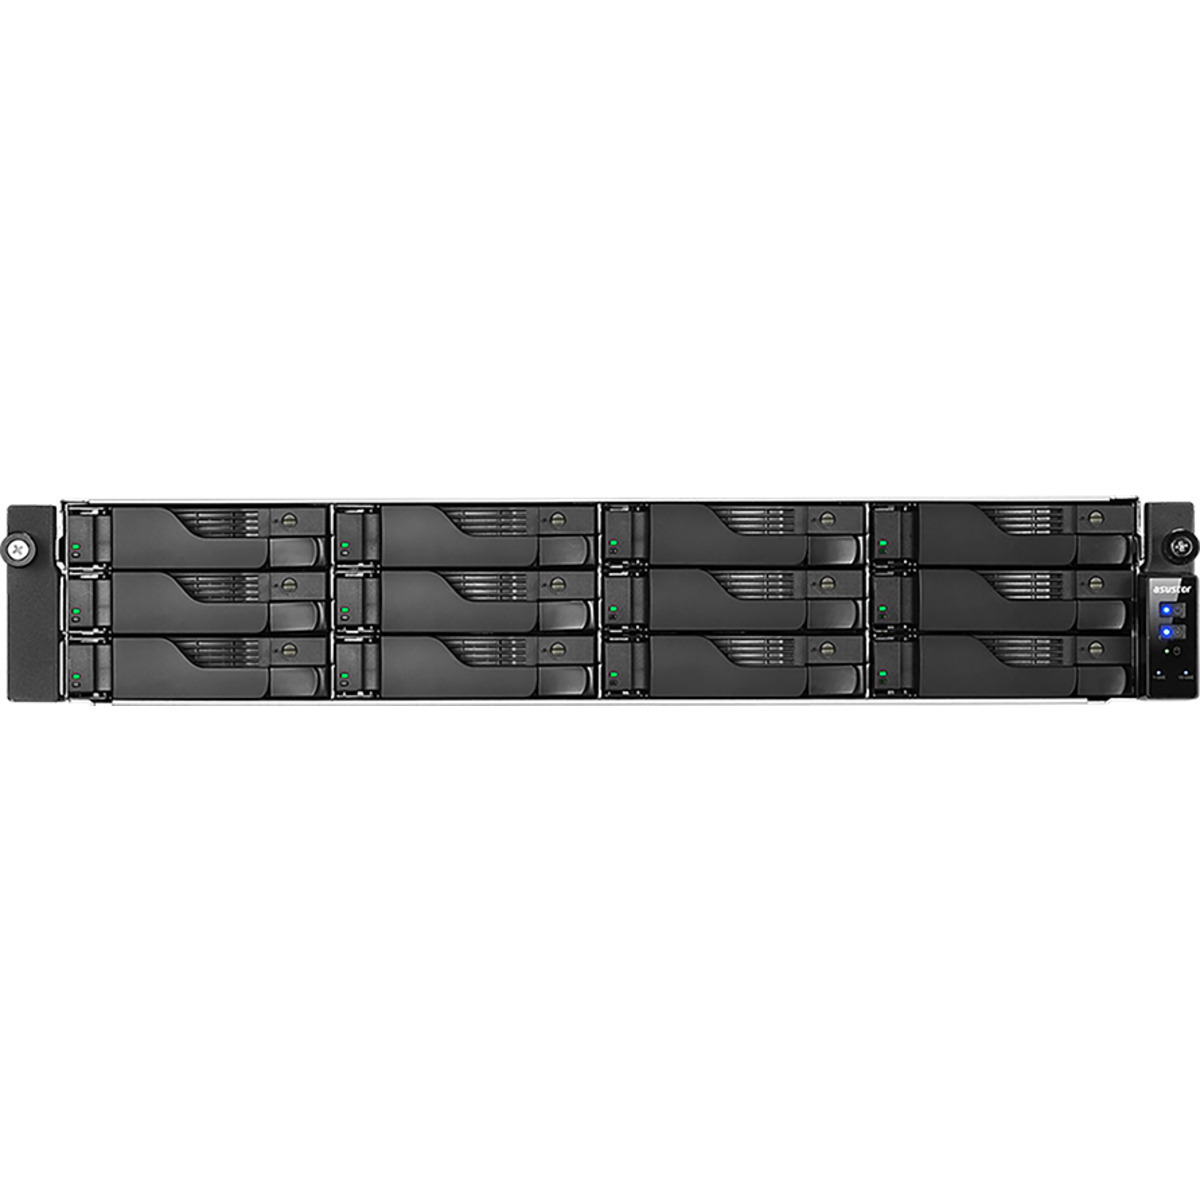 buy ASUSTOR LOCKERSTOR 12RD AS6512RD 12tb RackMount NAS - Network Attached Storage Device 12x1000gb Samsung 870 EVO MZ-77E1T0BAM 2.5 560/530MB/s SATA 6Gb/s SSD CONSUMER Class Drives Installed - Burn-In Tested - FREE RAM UPGRADE - nas headquarters buy network attached storage server device das new raid-5 free shipping simply usa LOCKERSTOR 12RD AS6512RD